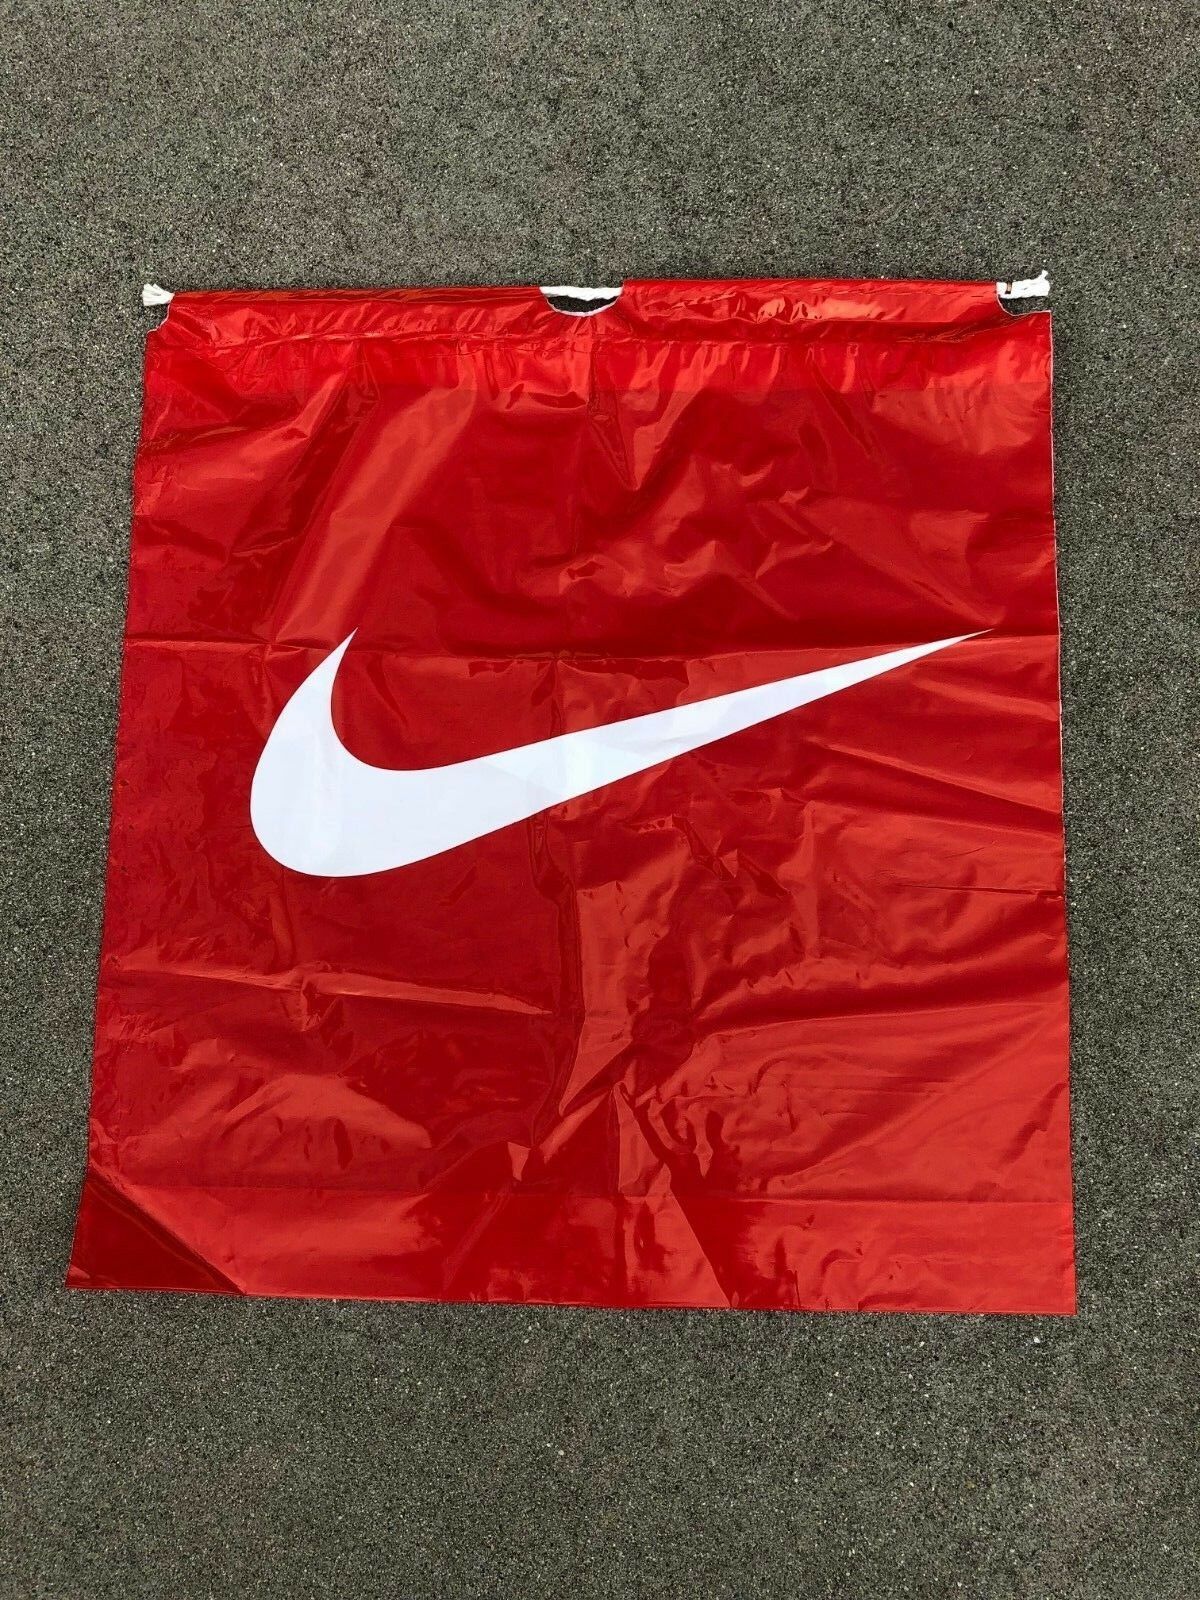 Nike Vintage Ad Poly Shopping Bags 20.5" X 18.5" Brand New Never Used